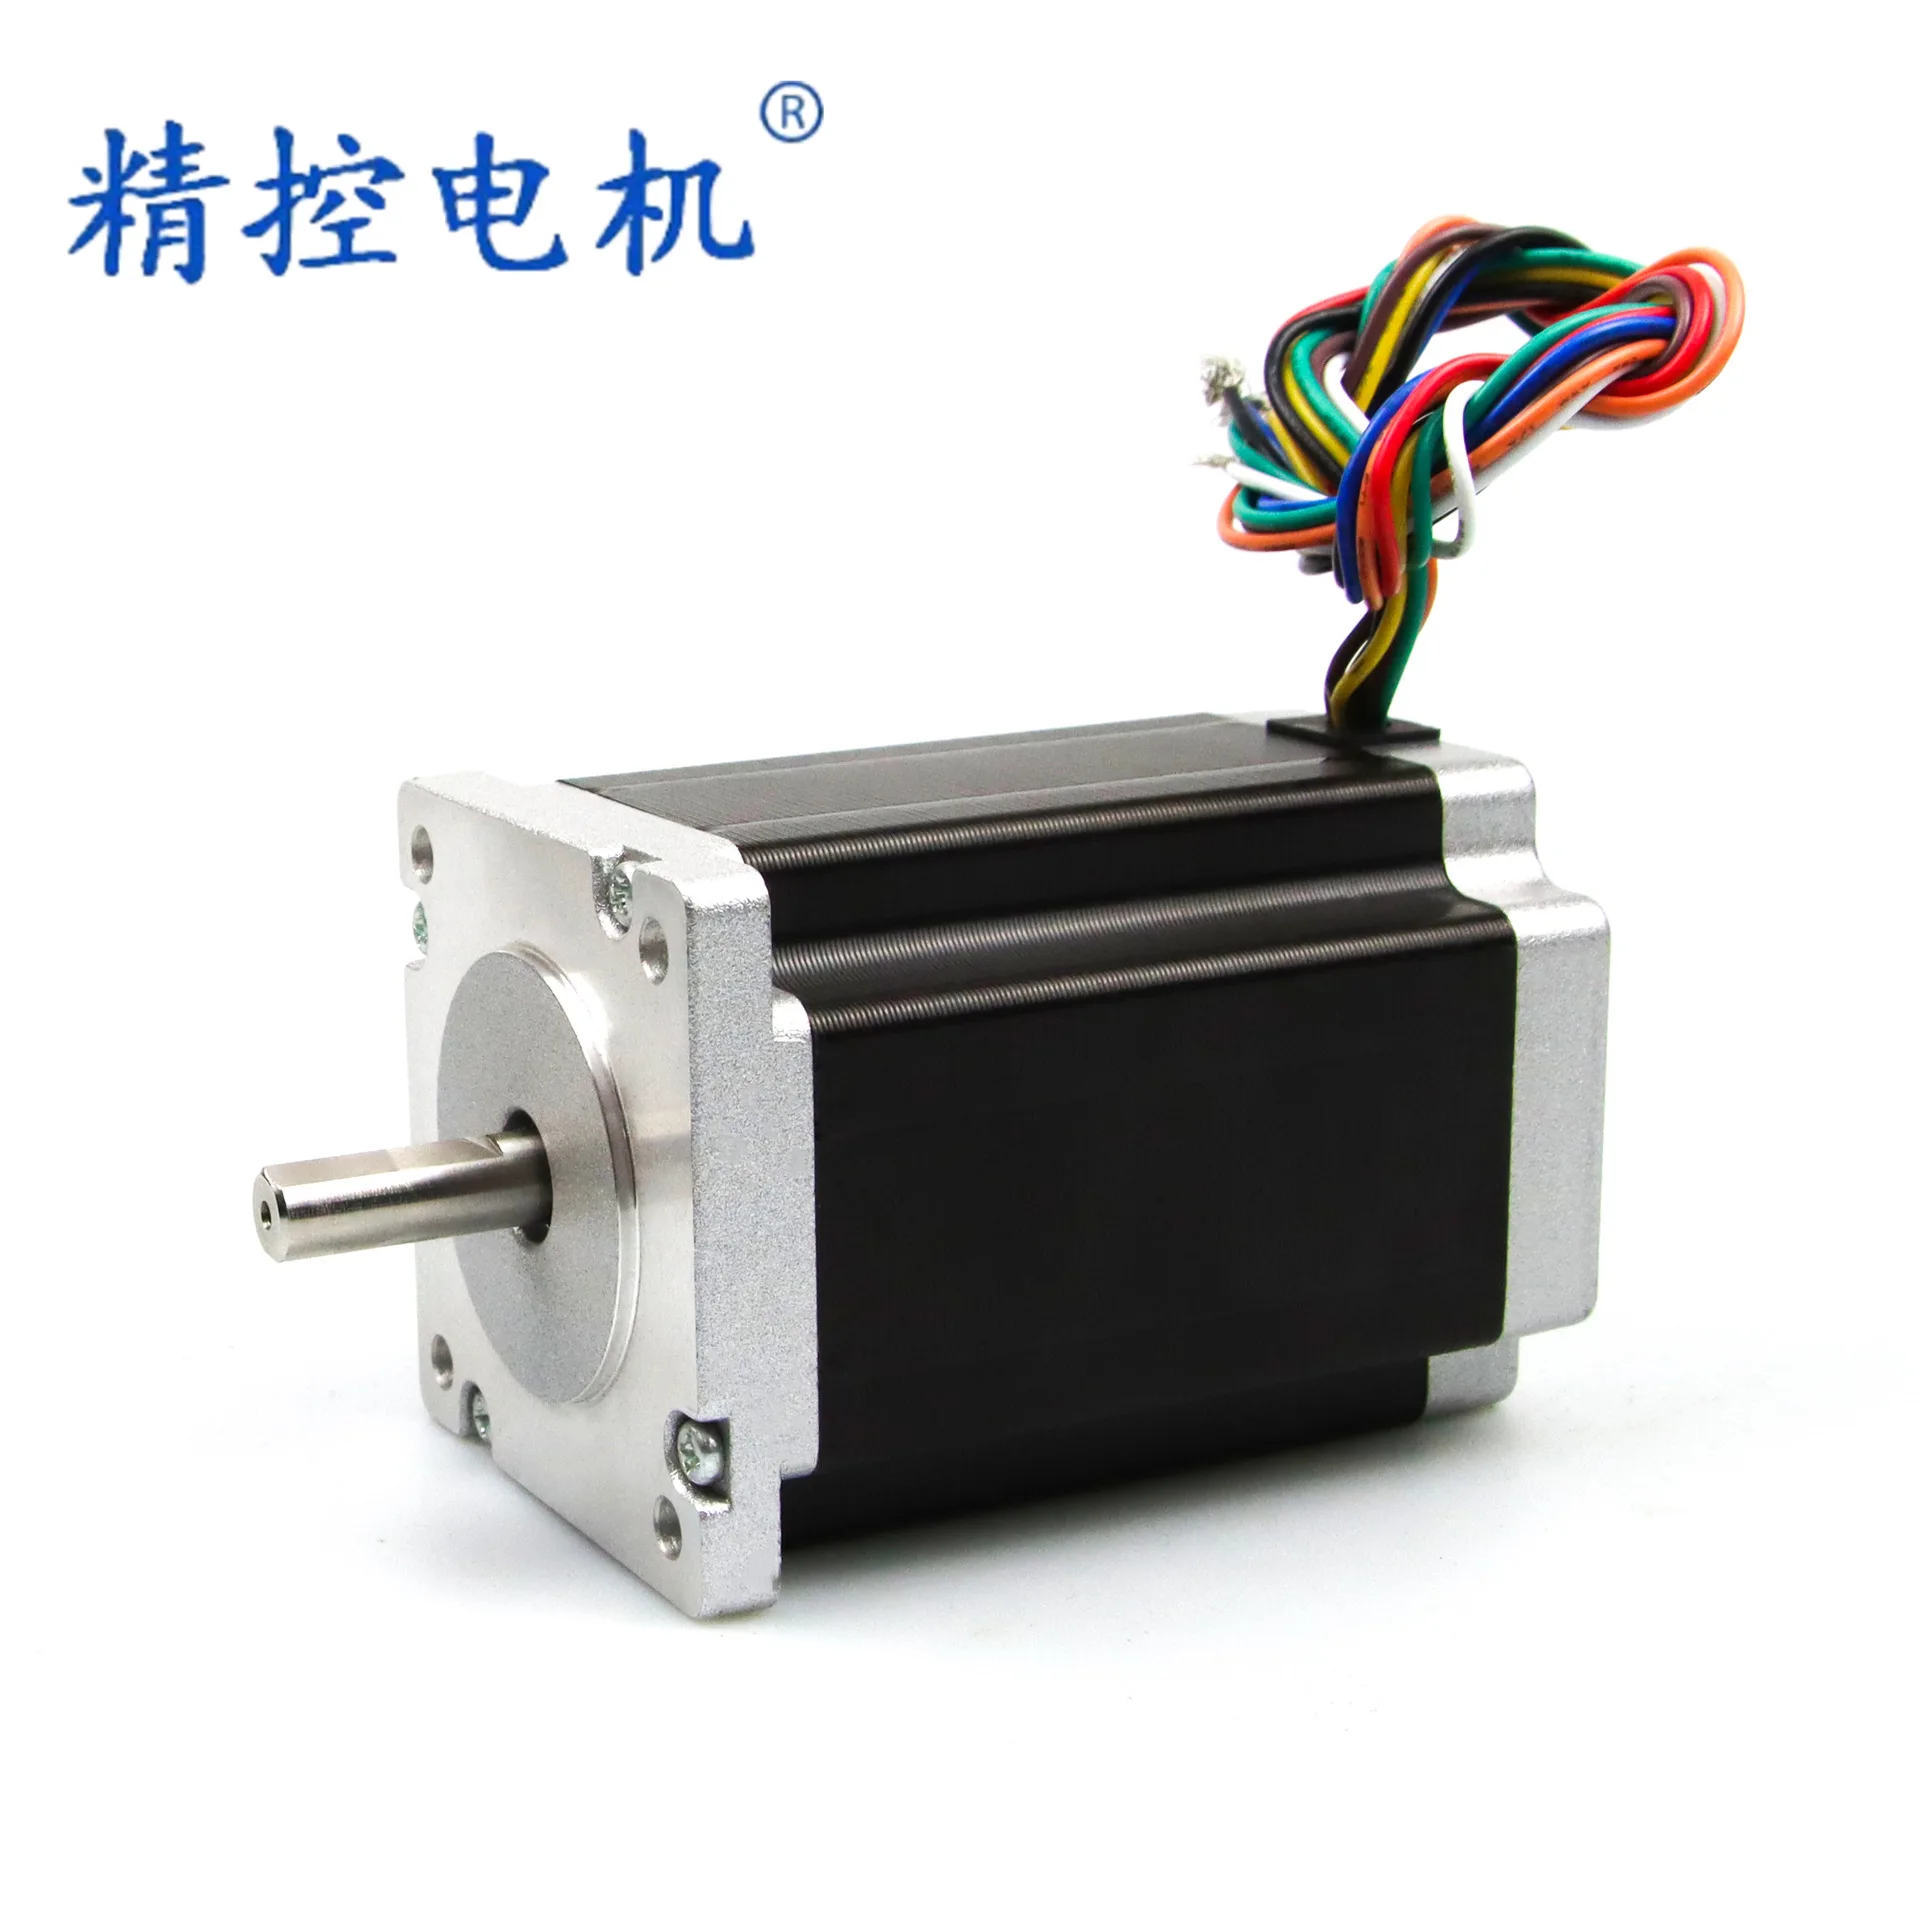 

JK60HS88-2008 NEMA24 Two-phase Hybrid Stepping Motor with Large Torque of 1.8 Degrees.